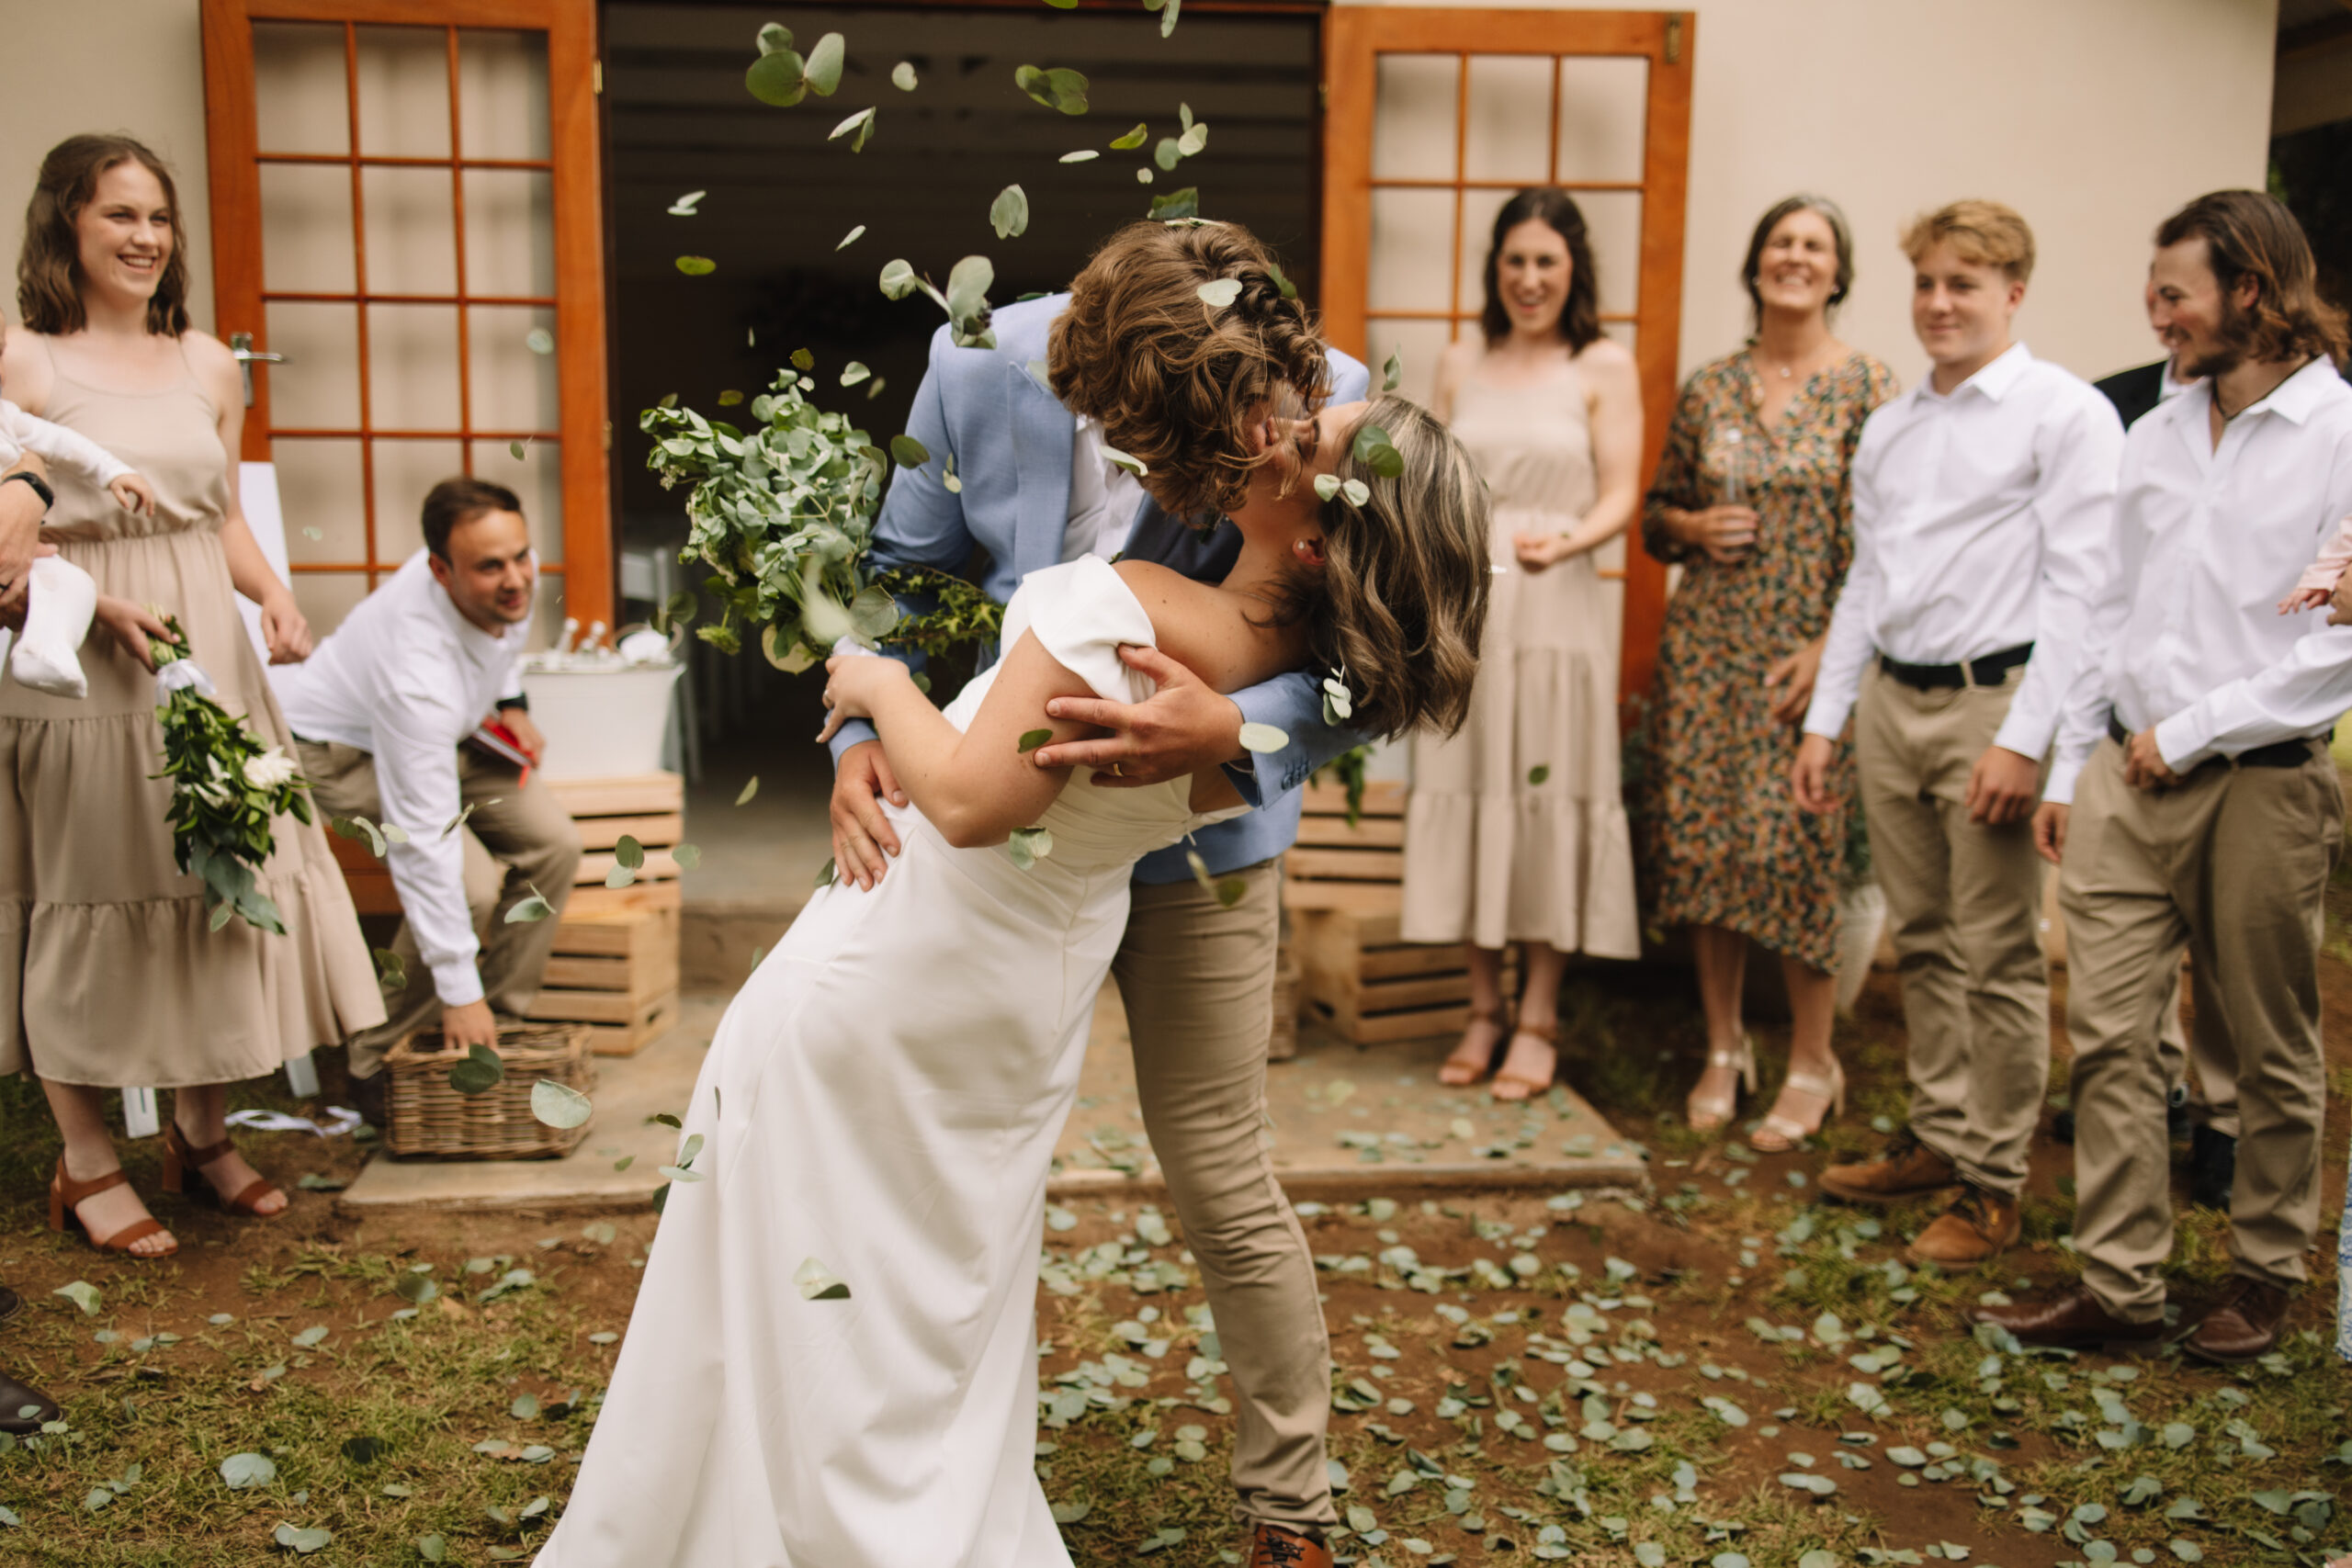 Bride and Groom doing a dip kiss on their way back down the aisle while their guest throw eucalyptus confetti petals towards them